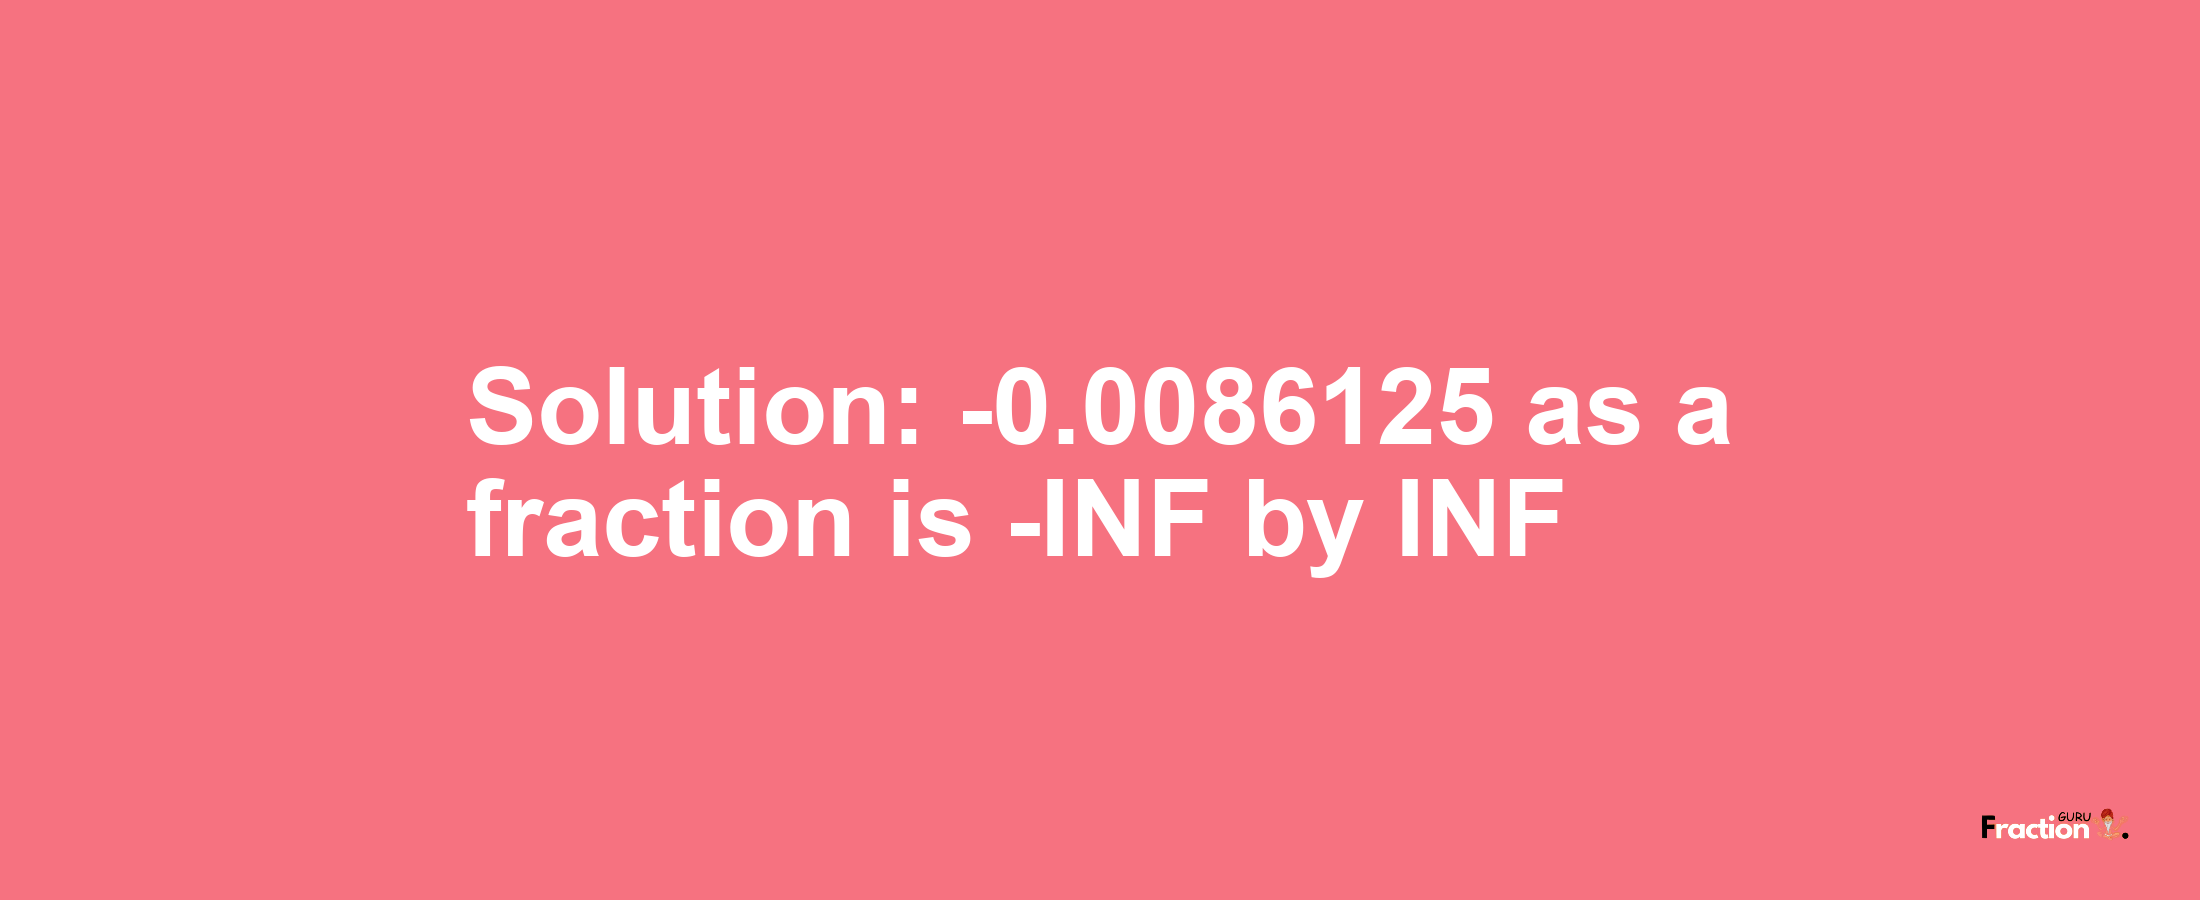 Solution:-0.0086125 as a fraction is -INF/INF